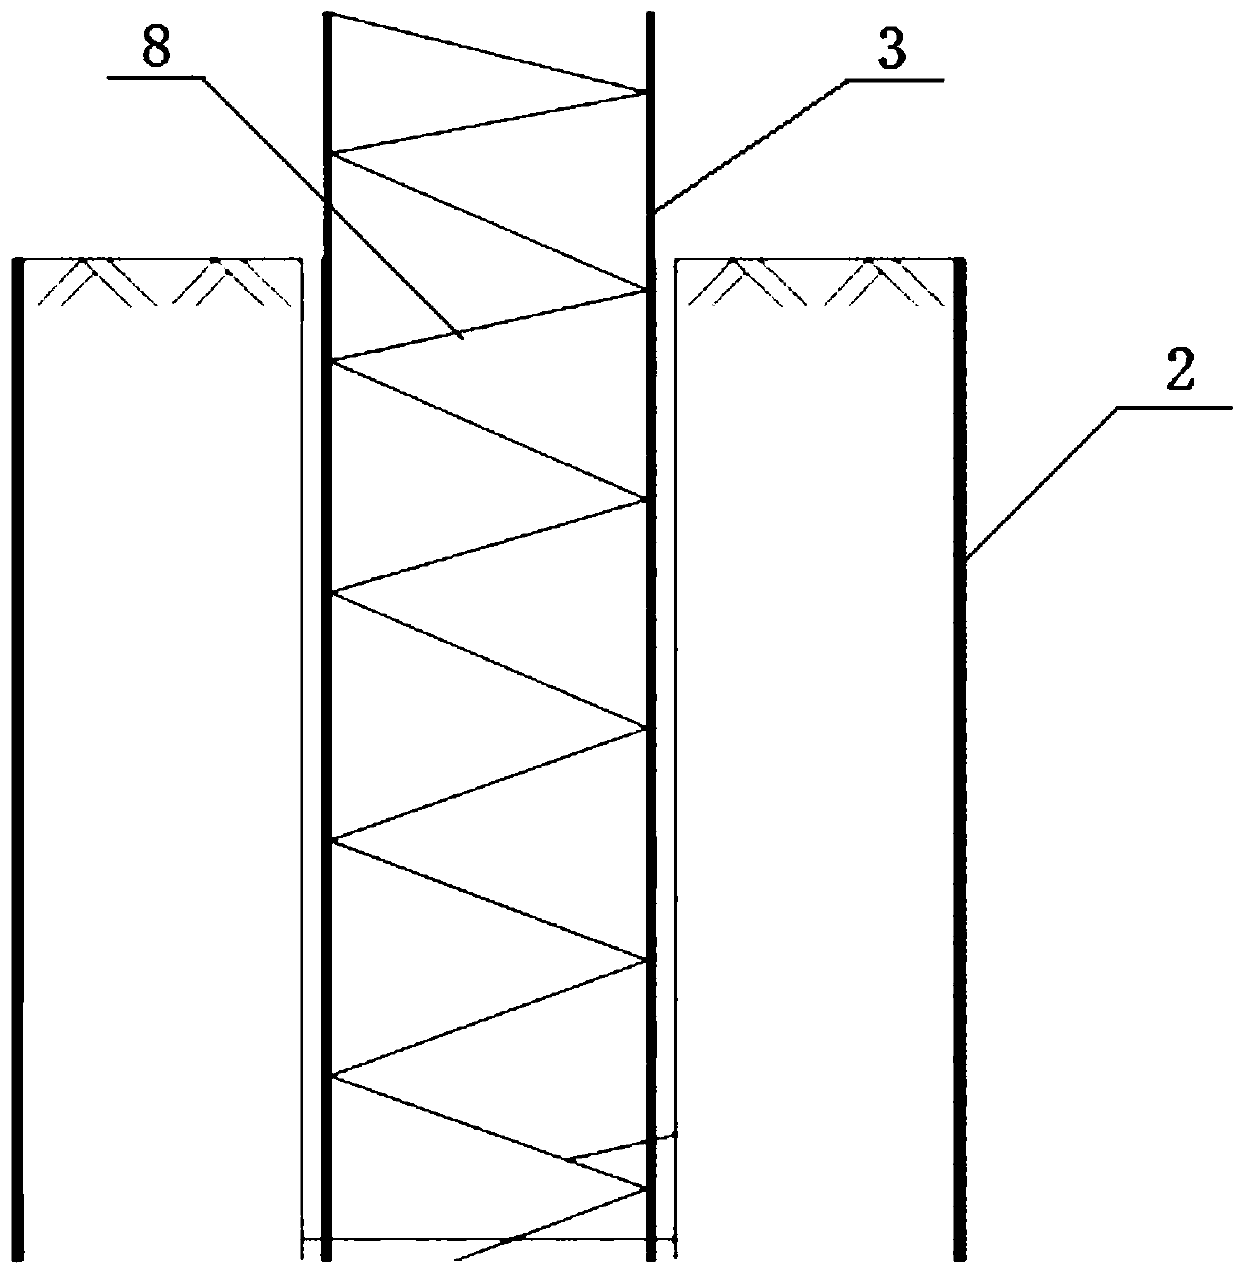 Foundation pile anti-corrosion system based on action of electric field